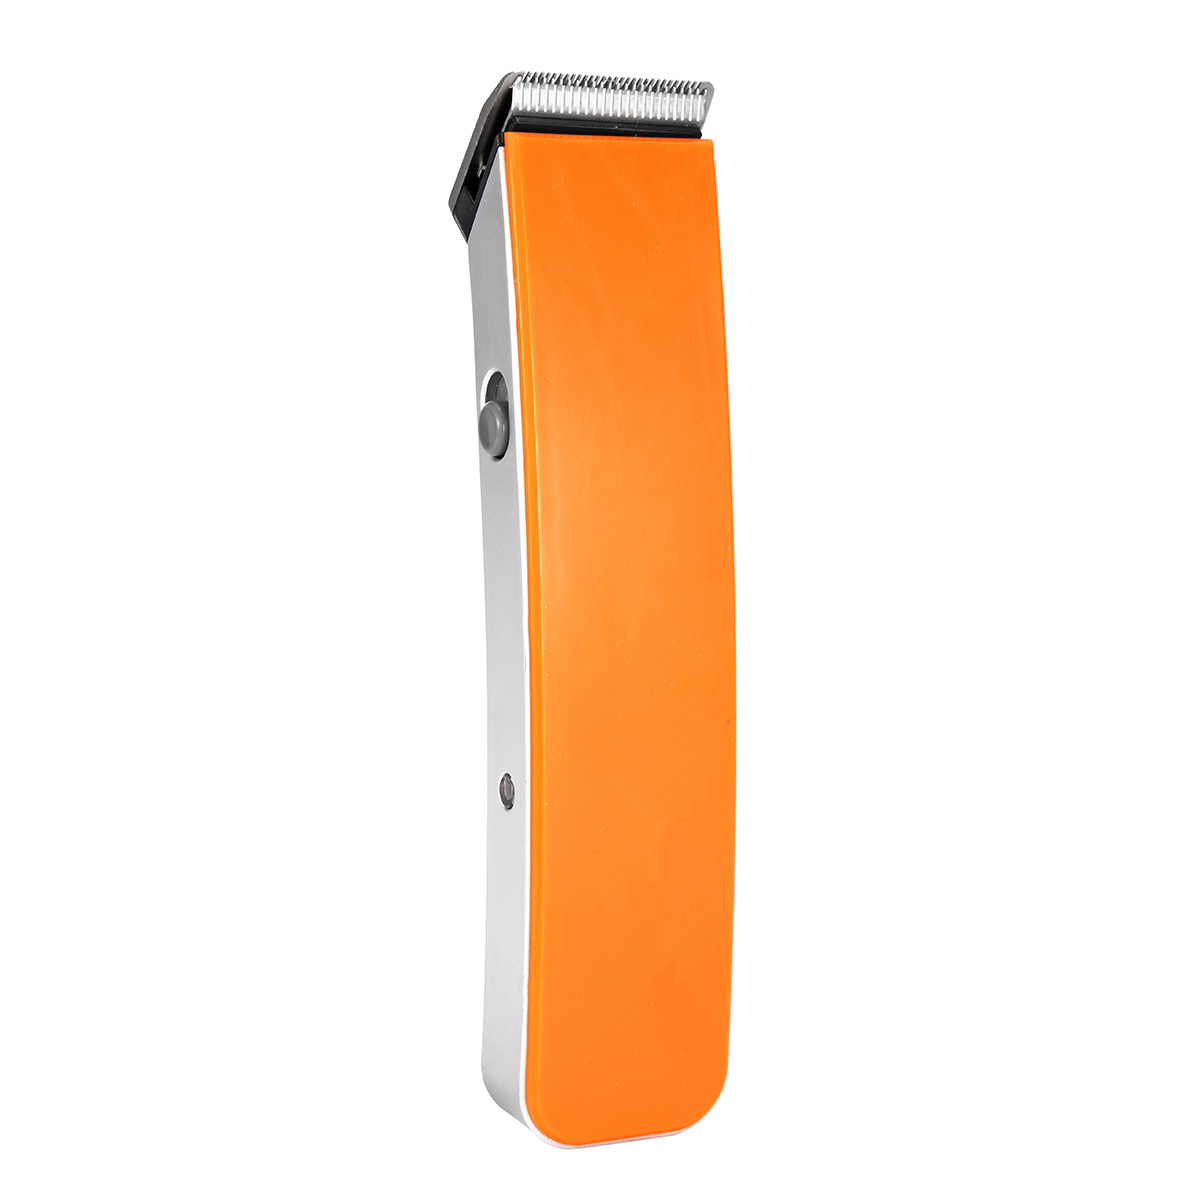 Rechargeable-Electric-Hair-Clipper-Cutter-Beard-Shaver-Razor-Trimmer-Groomer-1373096